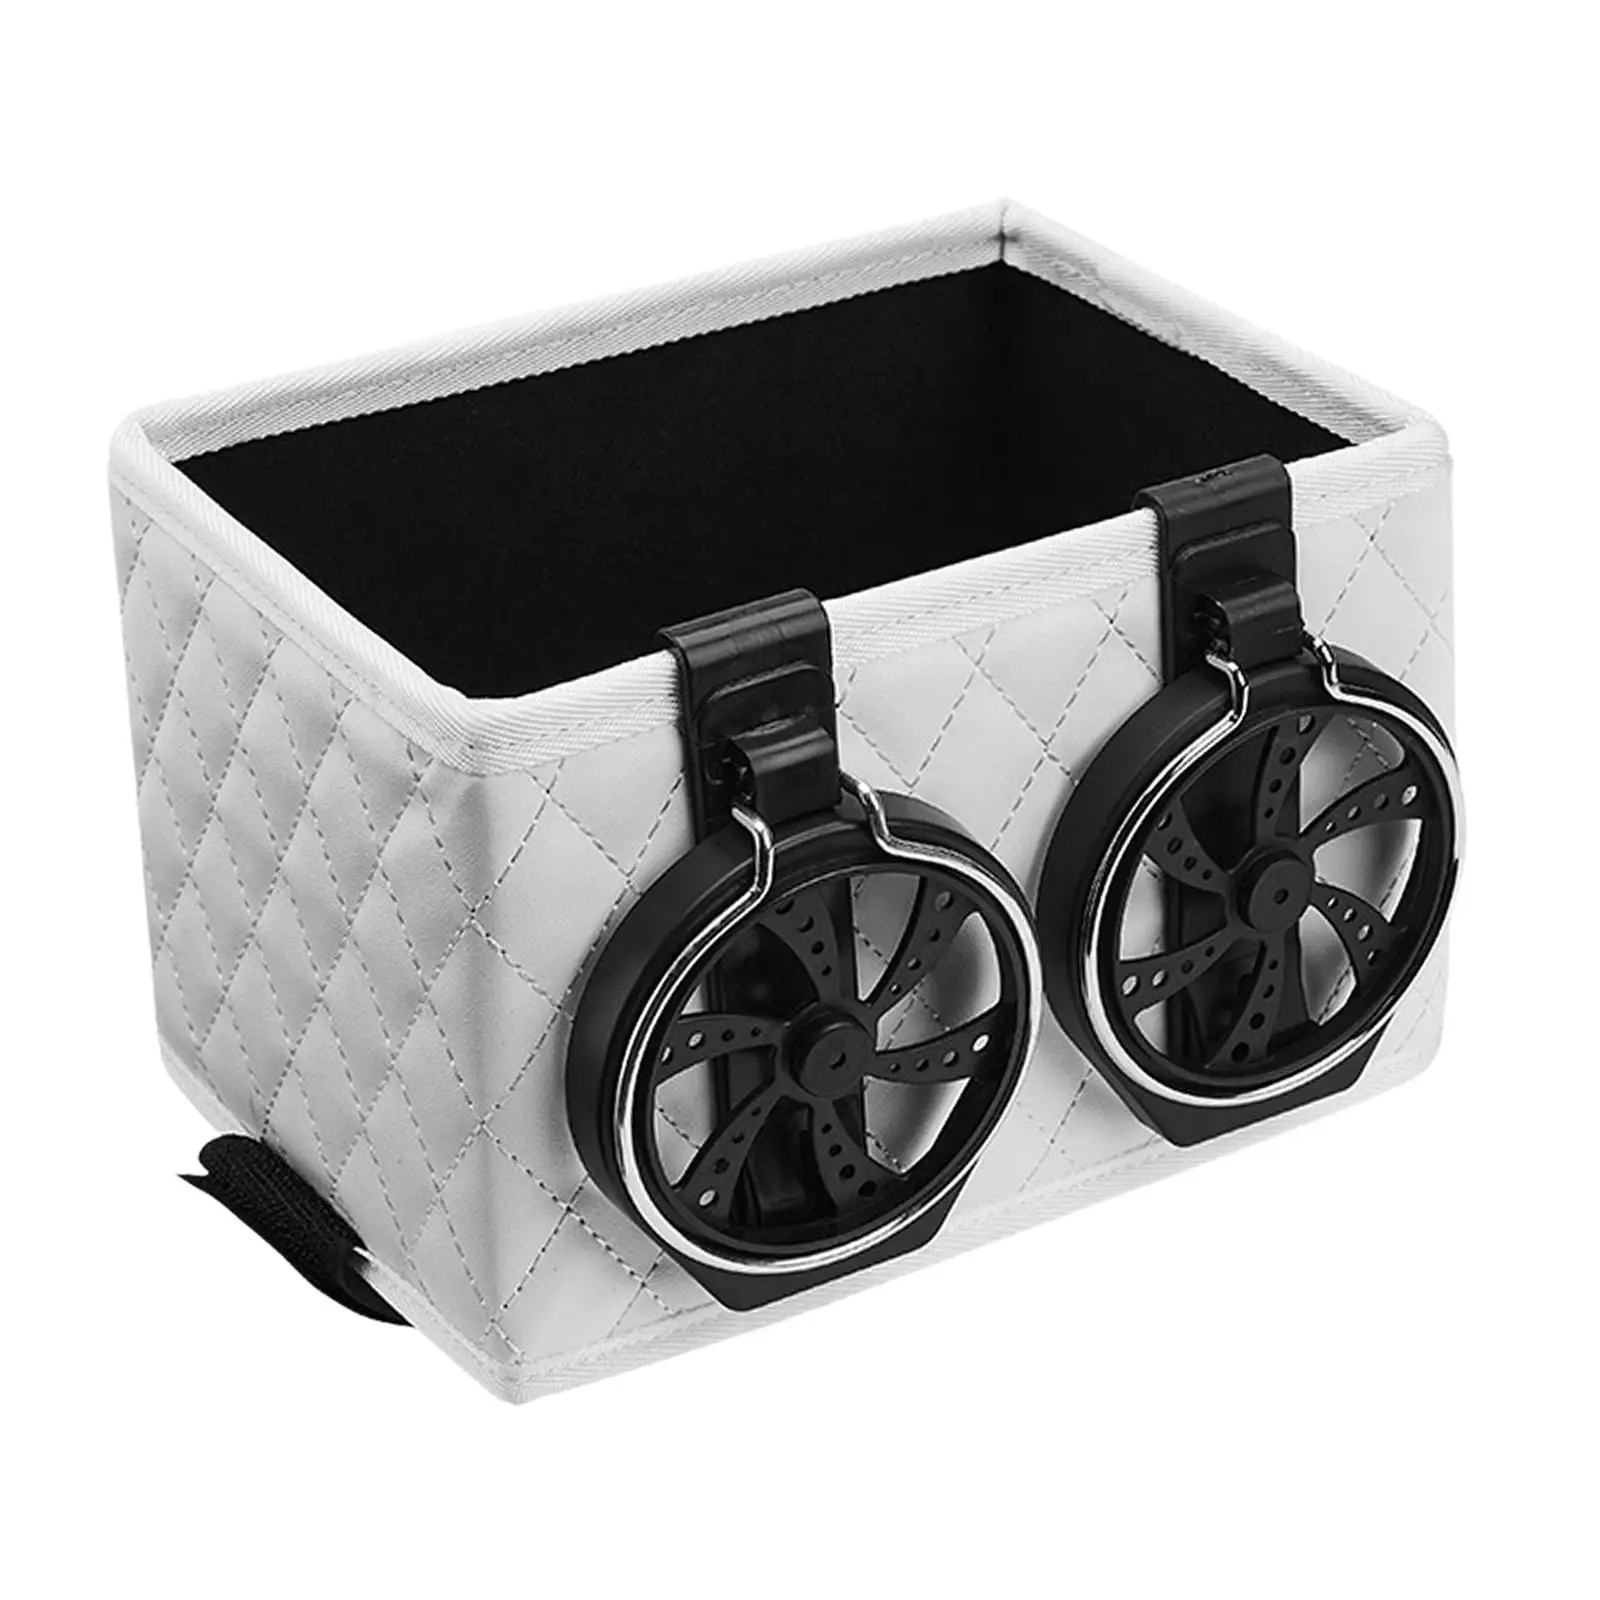 Water Cup Holder car Storage car Console Foldable 2 in 1 Car Storage Box Storage Rack for Cellphones Water Cup